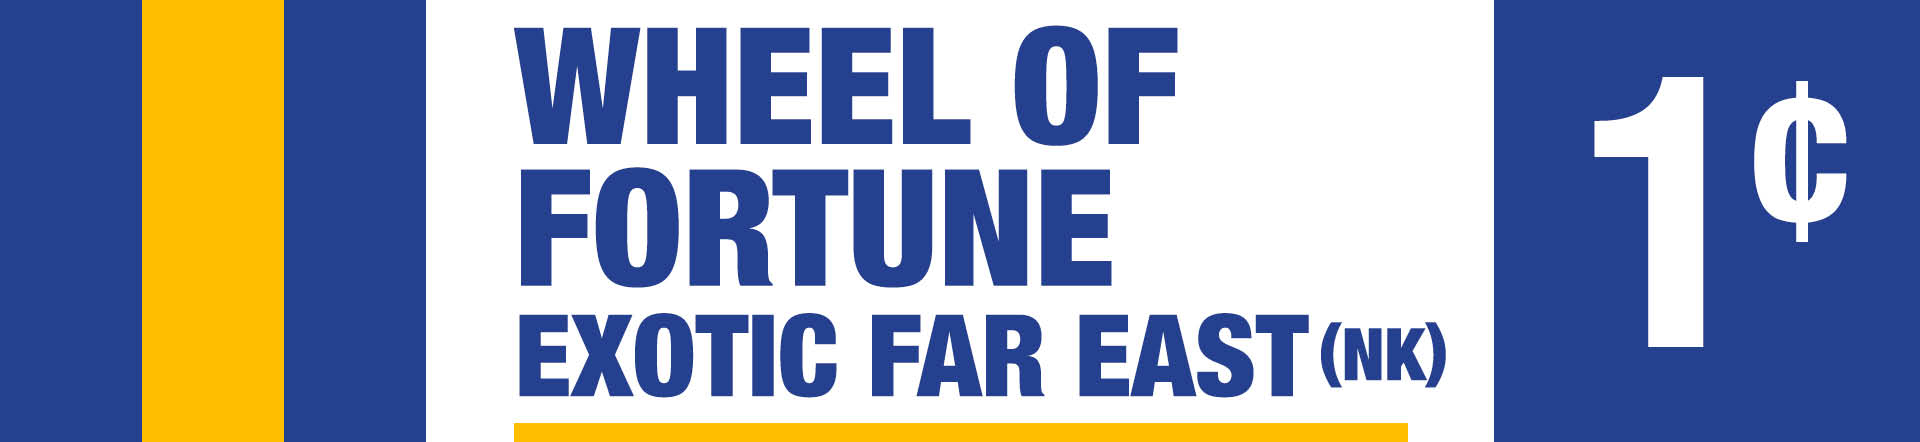 Wheel of Fortune: Exotic Far East (NK)